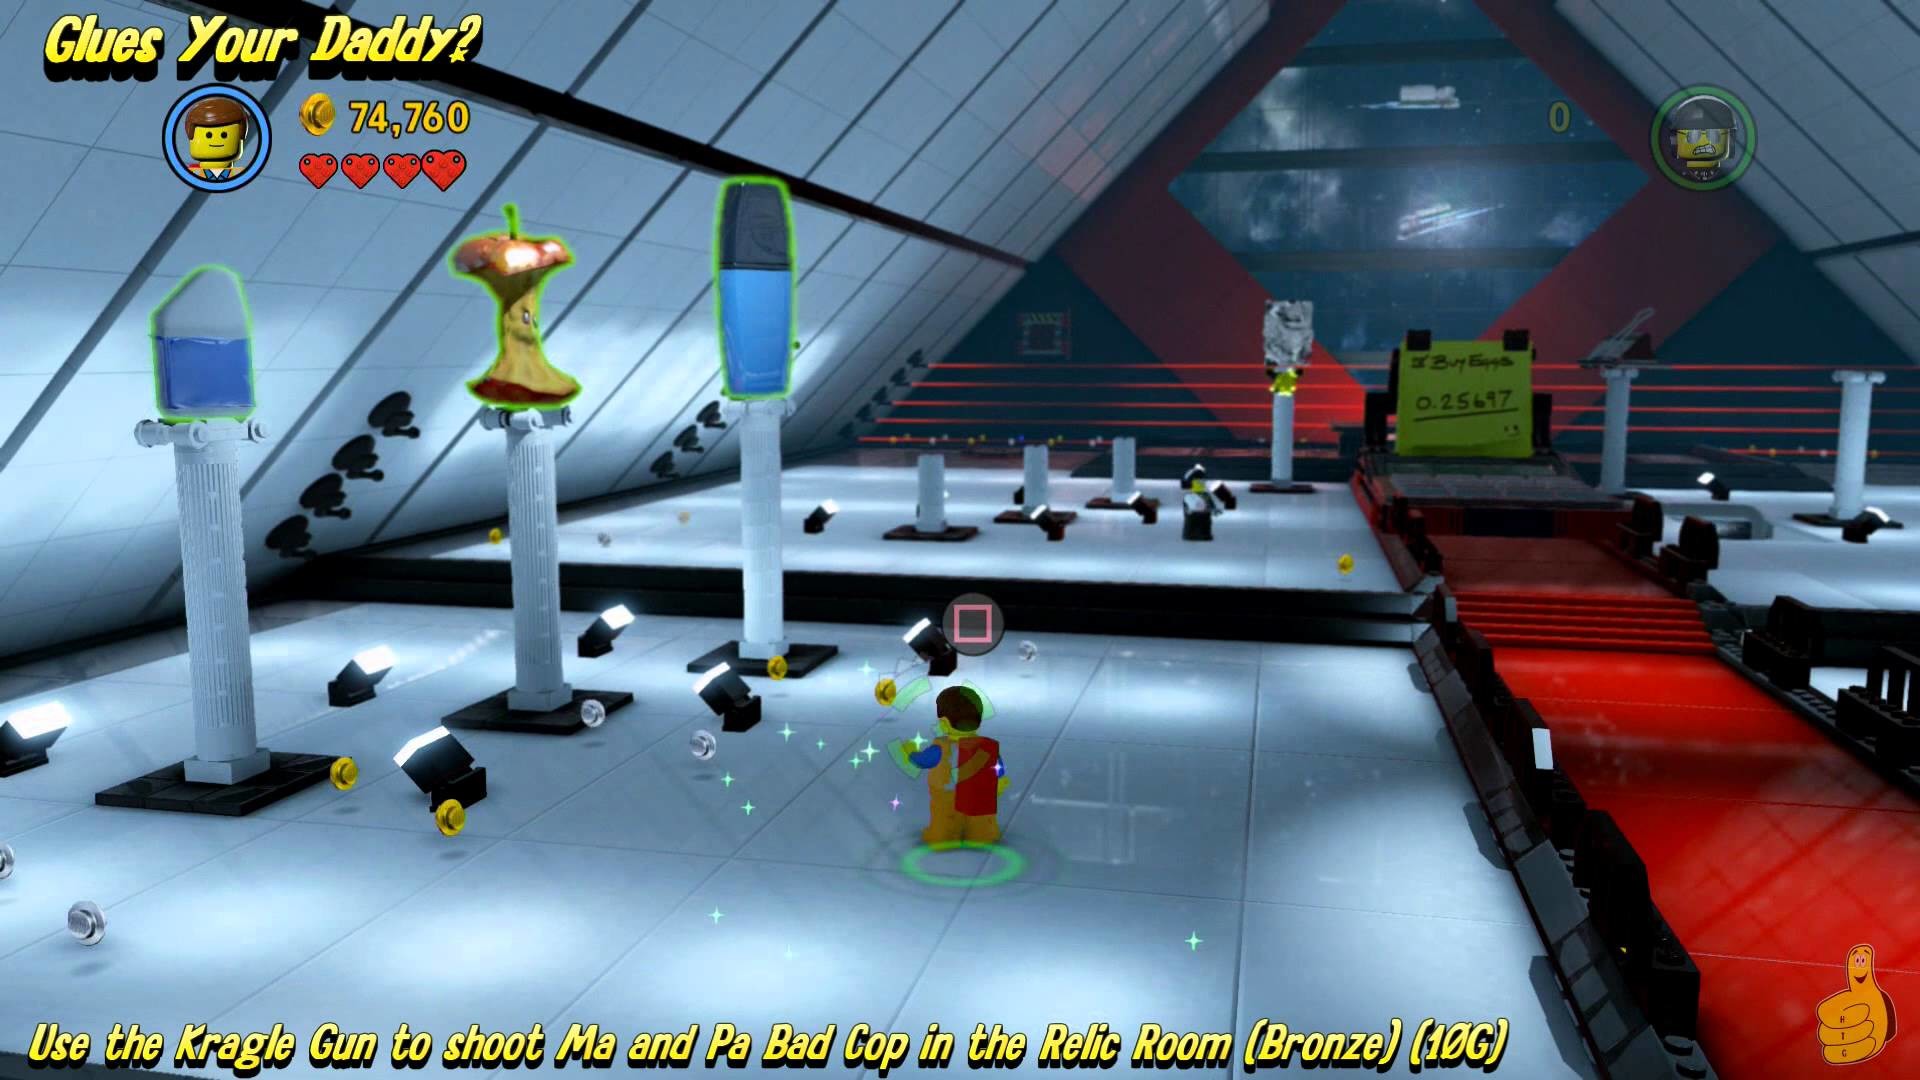 1920x1080 The Lego Movie Videogame: "Glues Your Daddy?" Trophy/Achievement - HTG -  YouTube